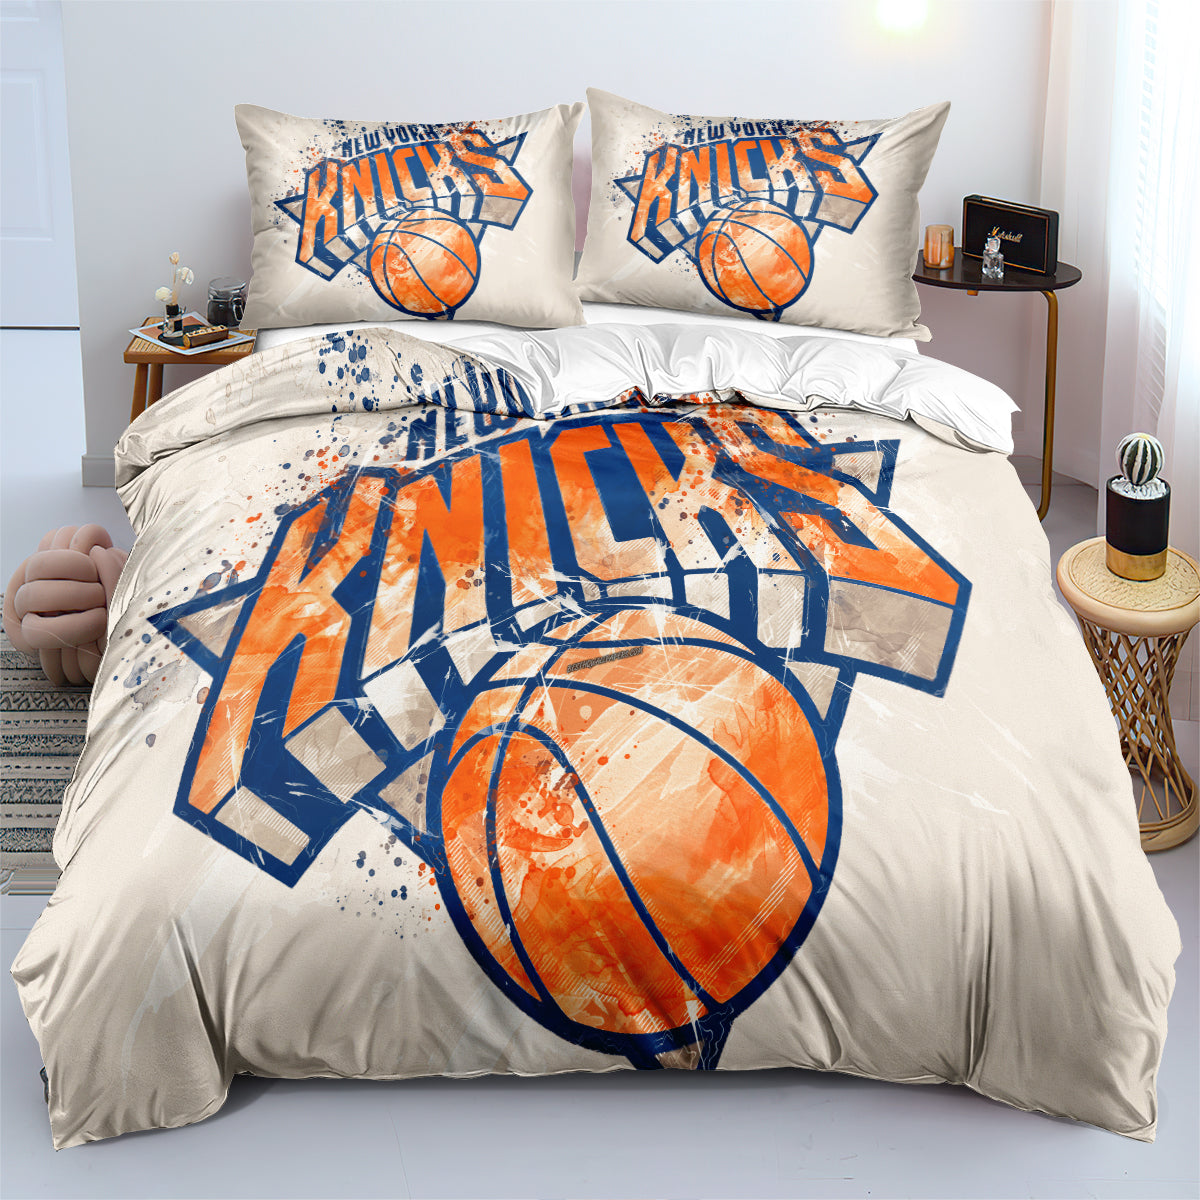 New York Basketball Knicks Bedding Set Quilt Cover Without Filler